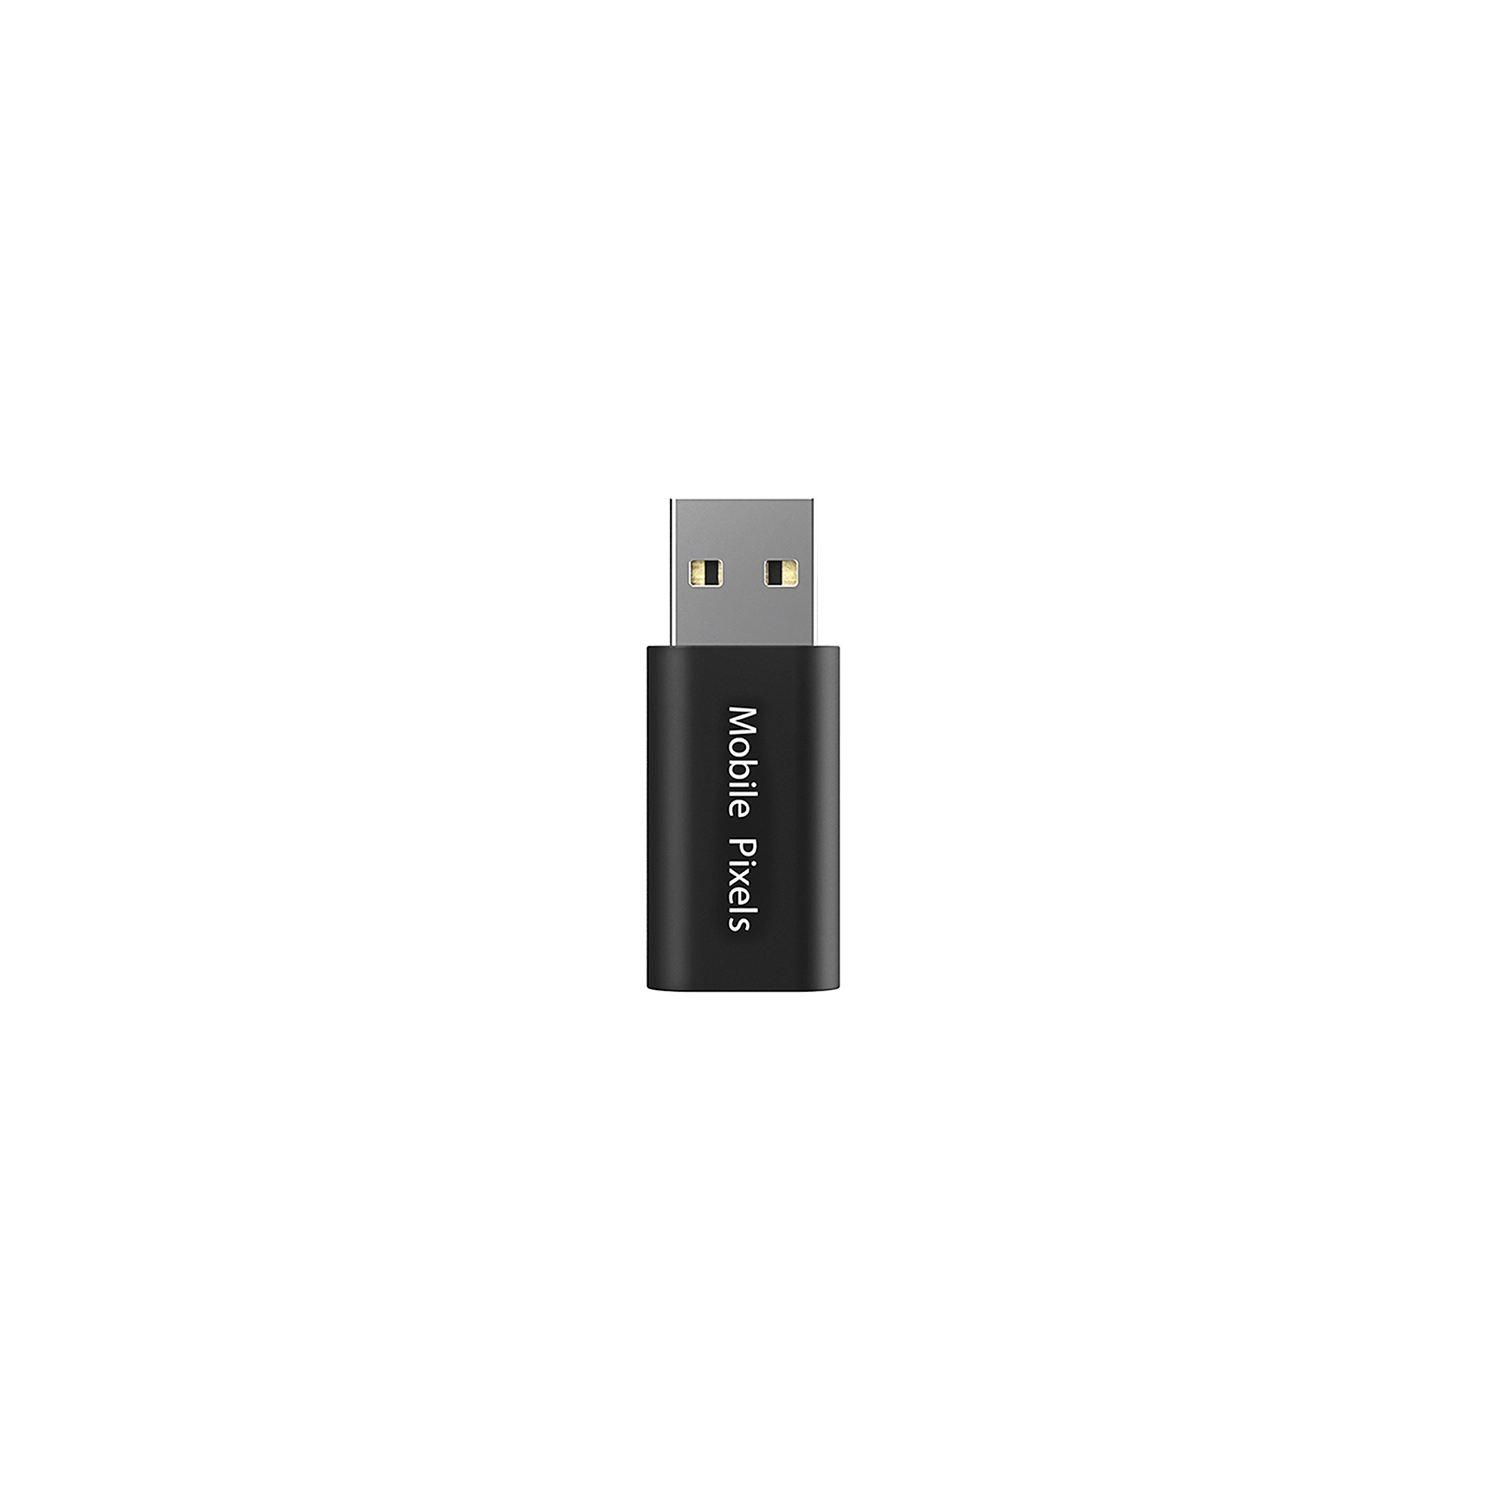 USB A to C Adapter